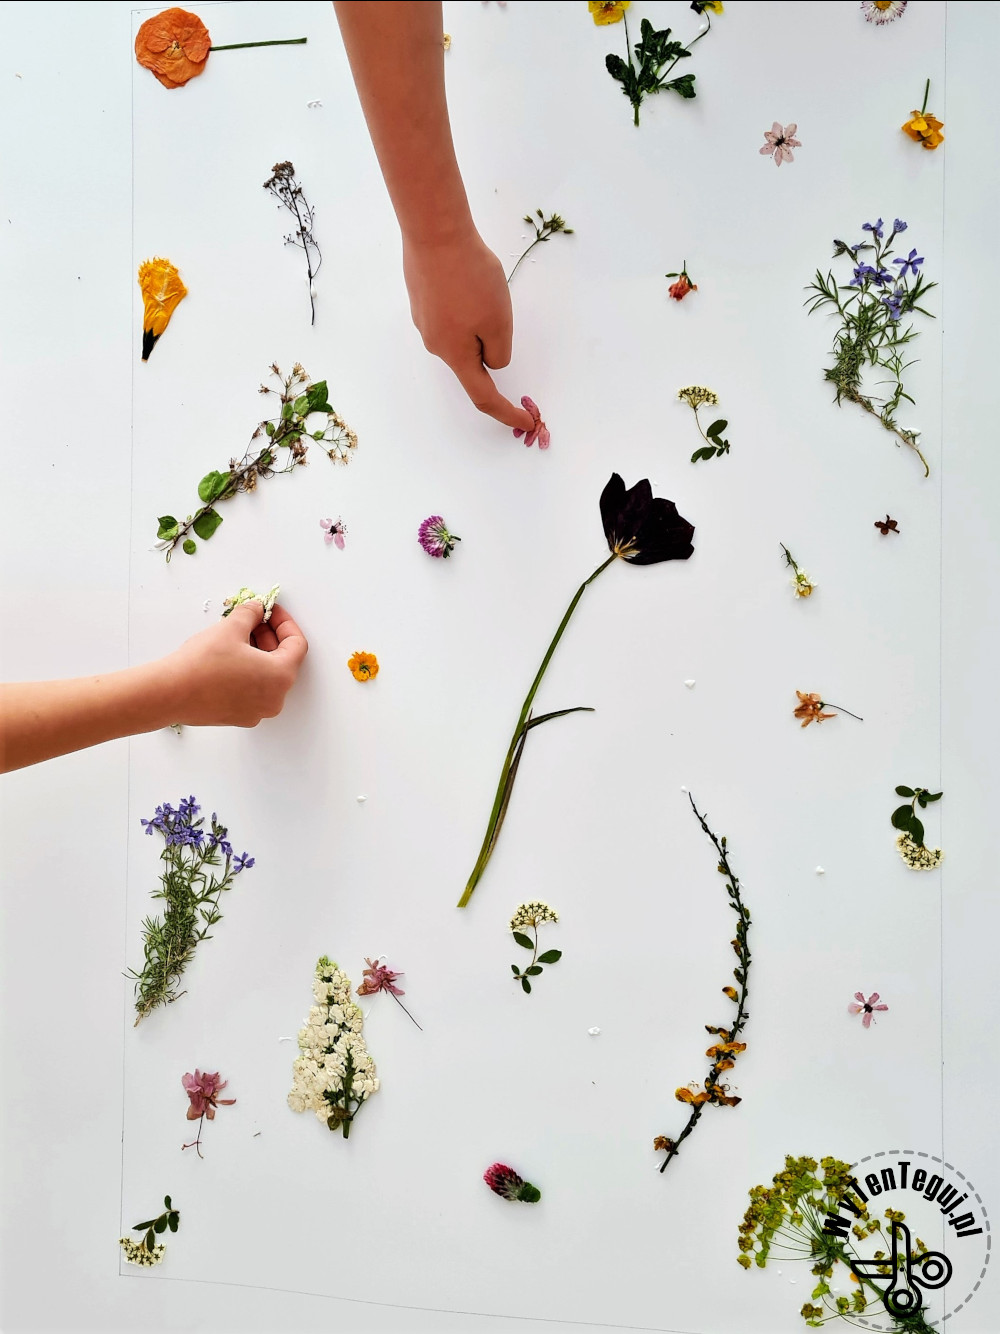 How to make pressed flowers art?